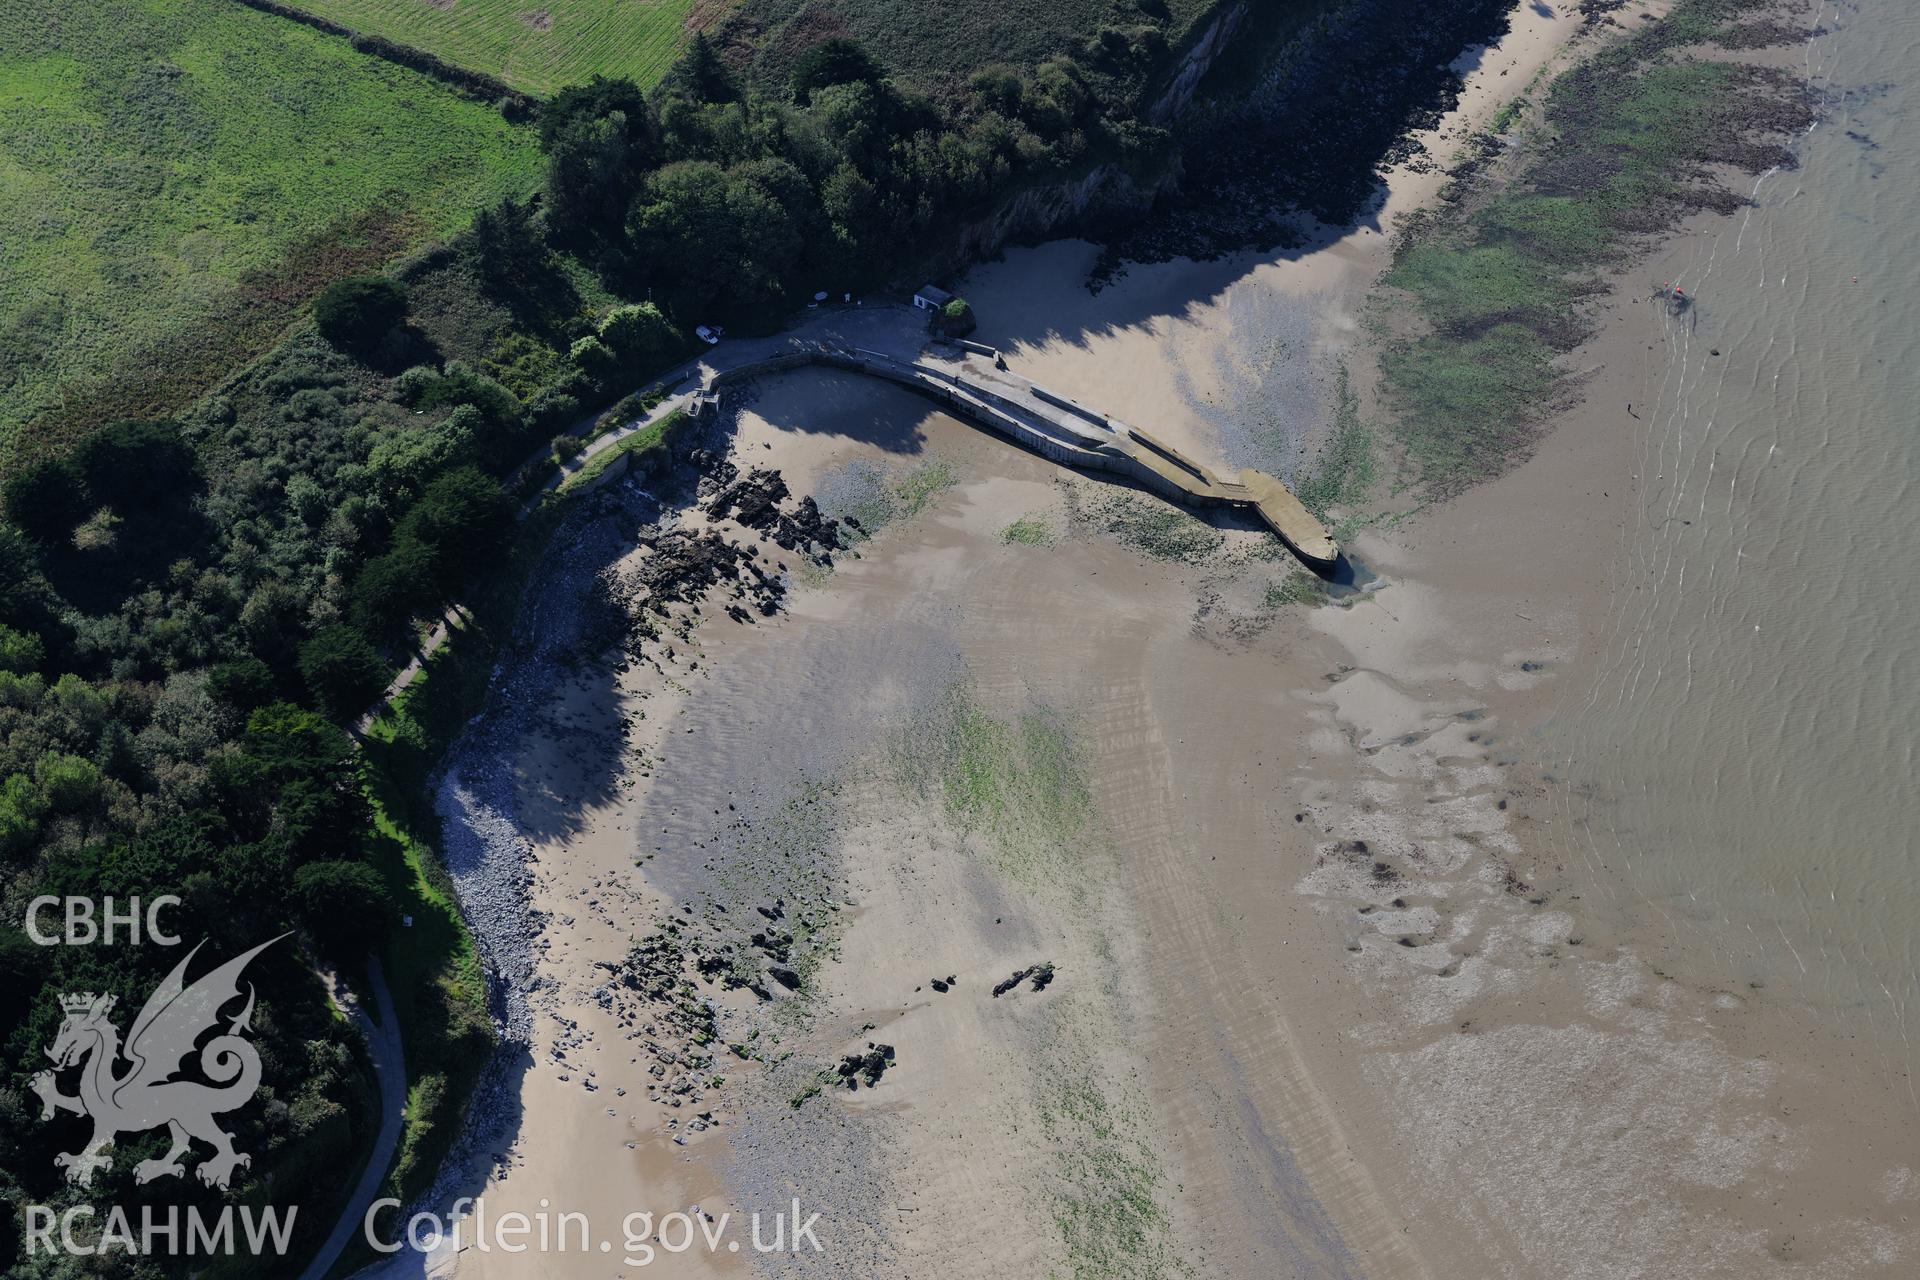 Jetty and landing place at Priory Bay, on the northern coast of Caldey Island. Oblique aerial photograph taken during the Royal Commission's programme of archaeological aerial reconnaissance by Toby Driver on 30th September 2015.